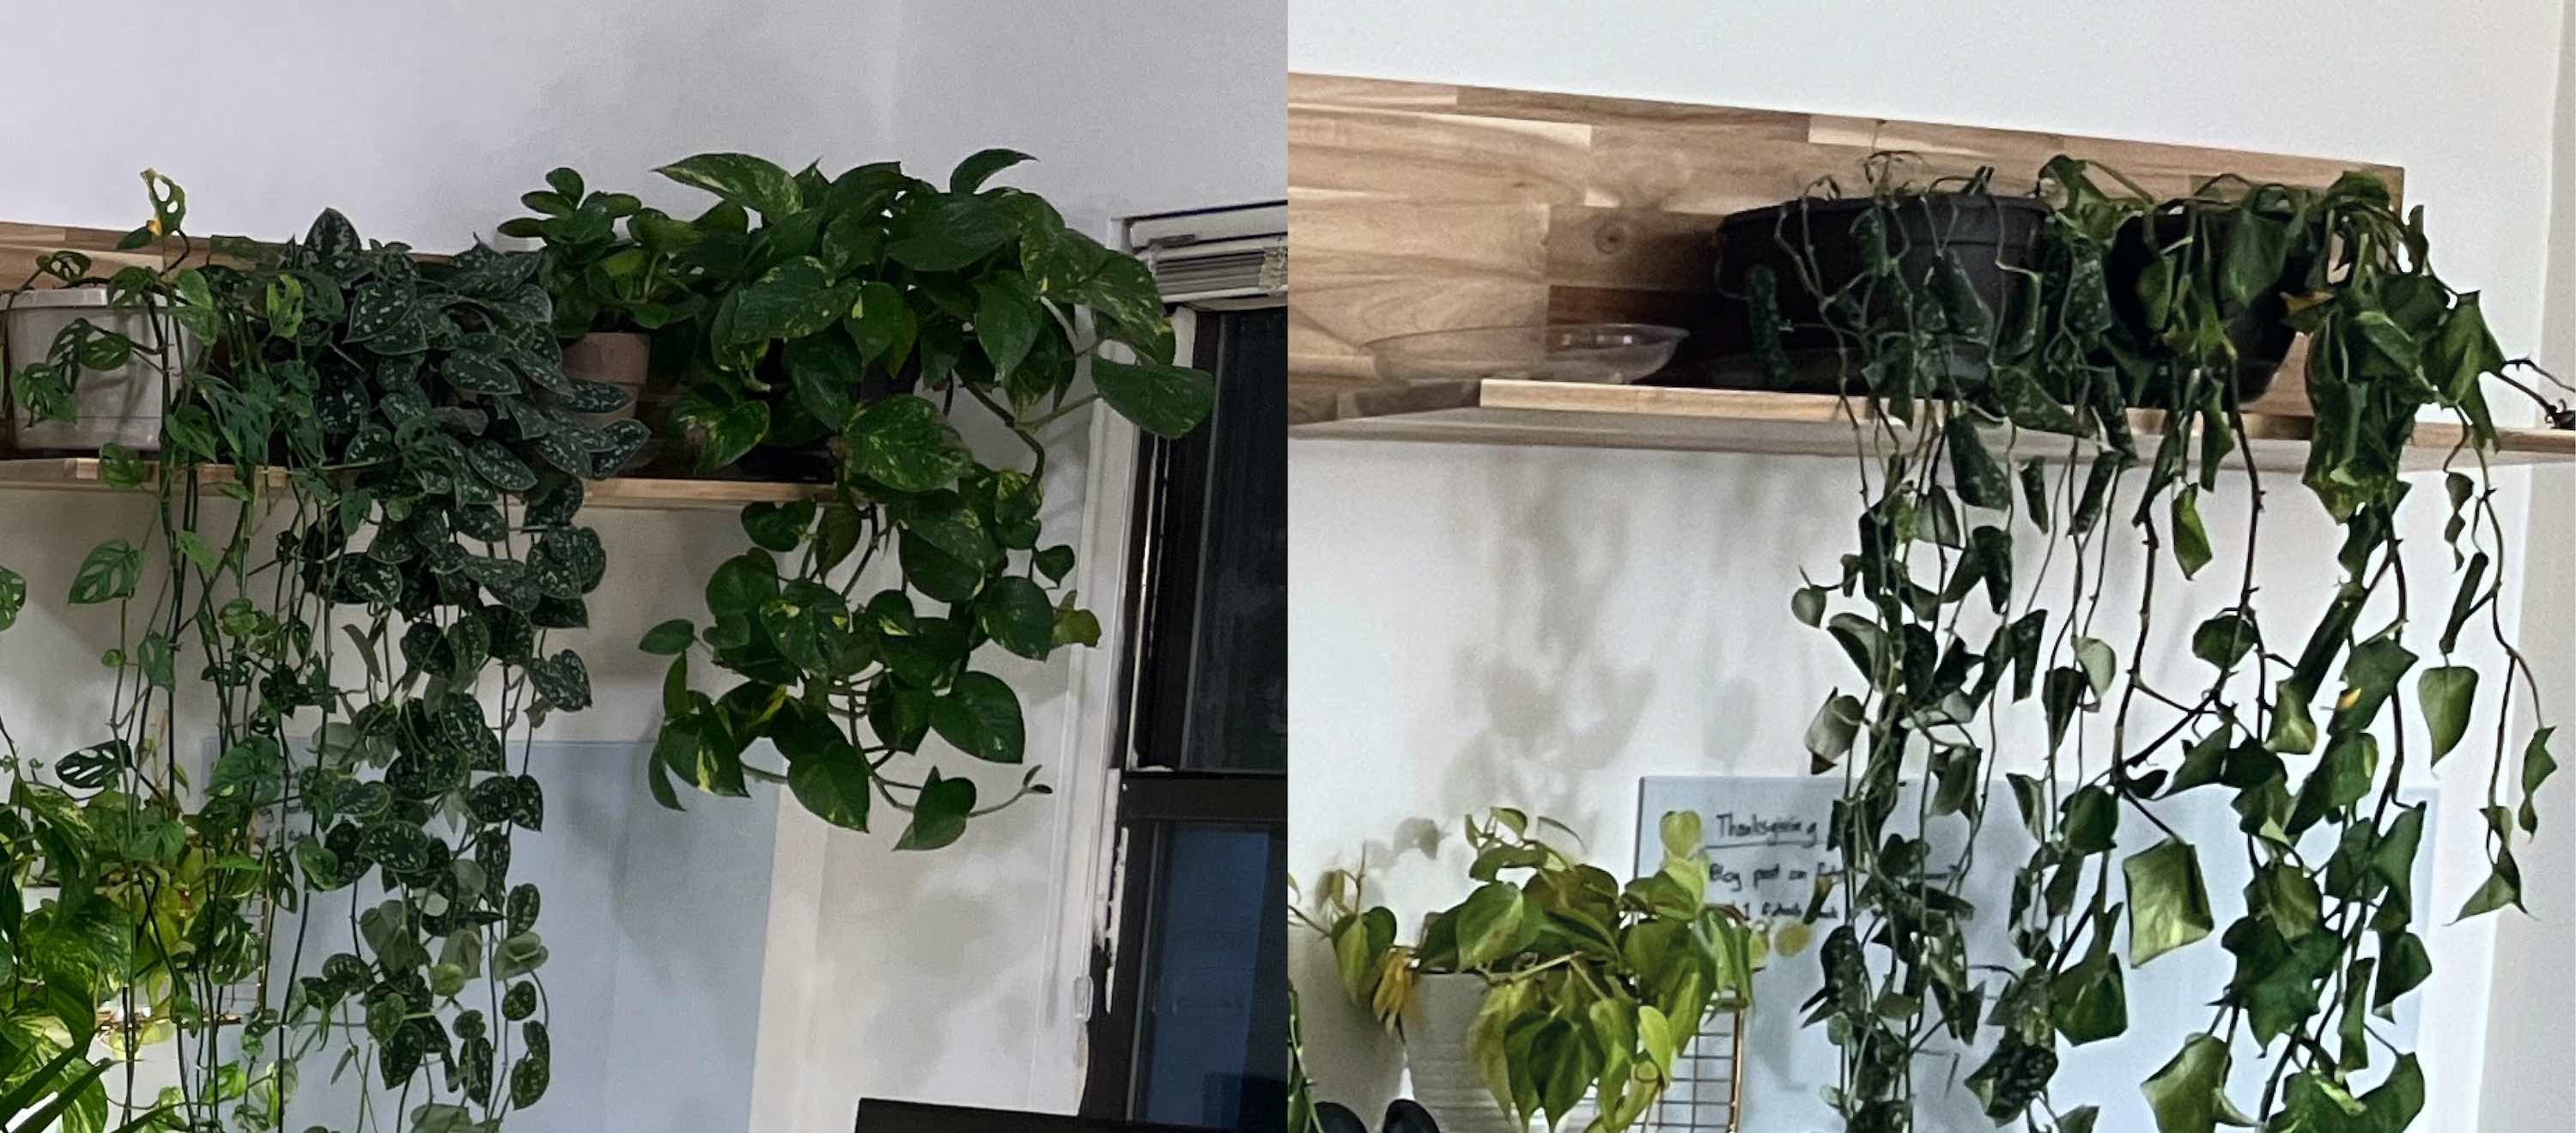 On the left are pothos that are lush and green. On the right are pothos where the leaves are shriveled up and brown.